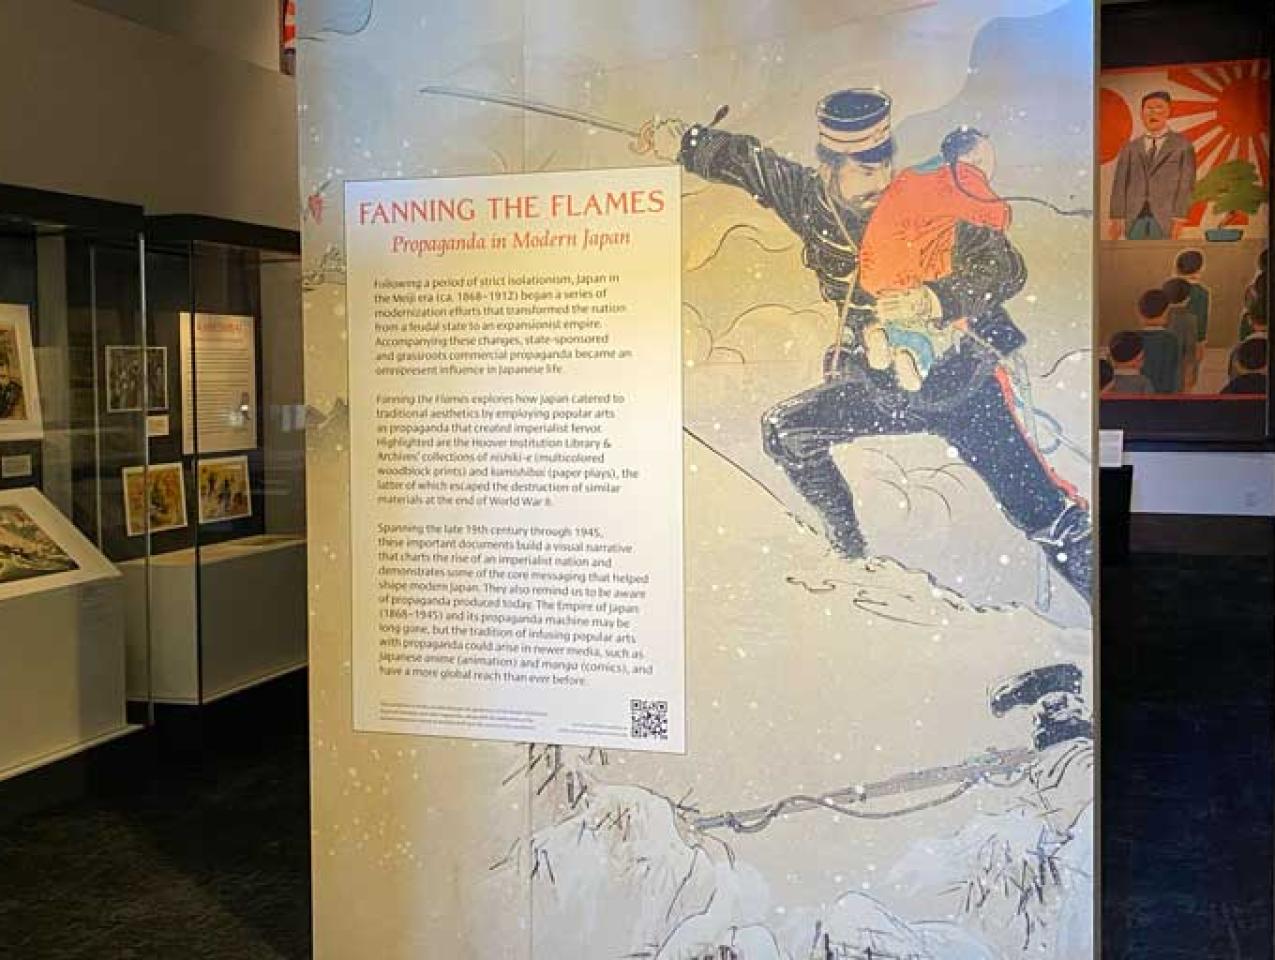 Photograph of the entrance to the Fanning the Flames exhibition in Hoover Tower, 2022